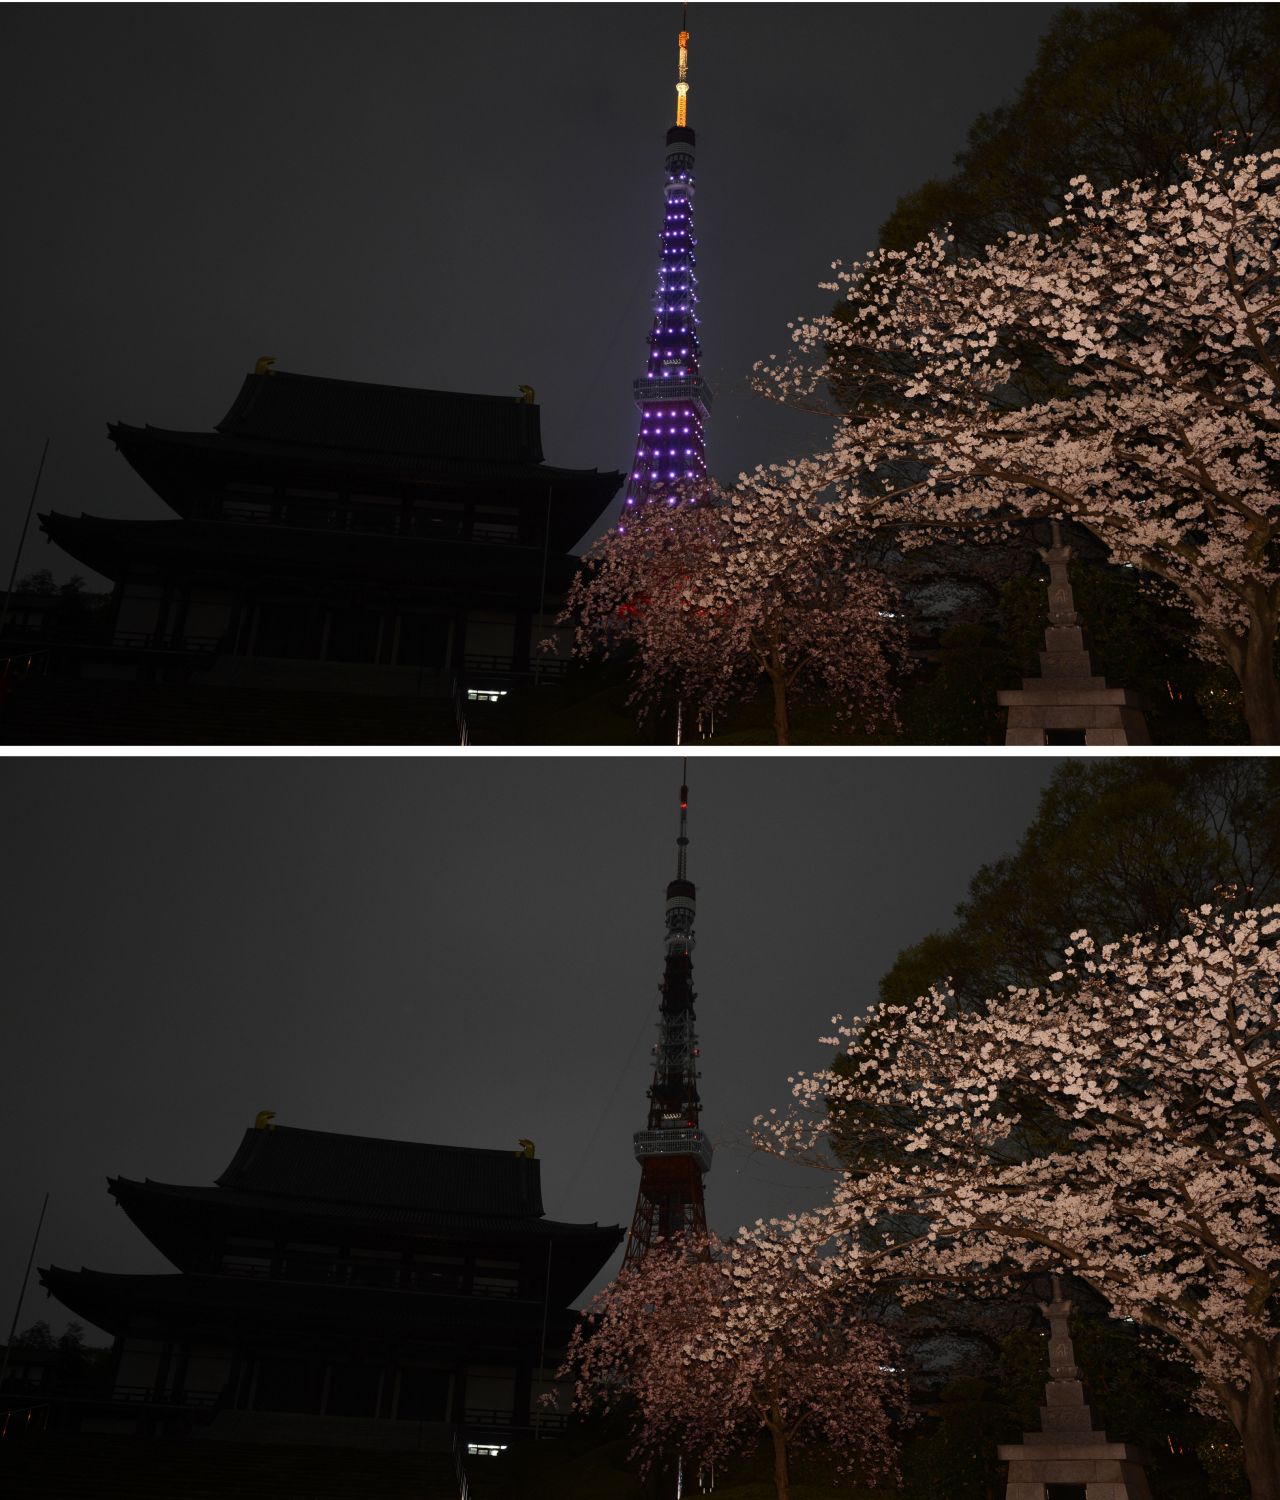 TheTokyo Tower with lights turned off during Earth Hour.